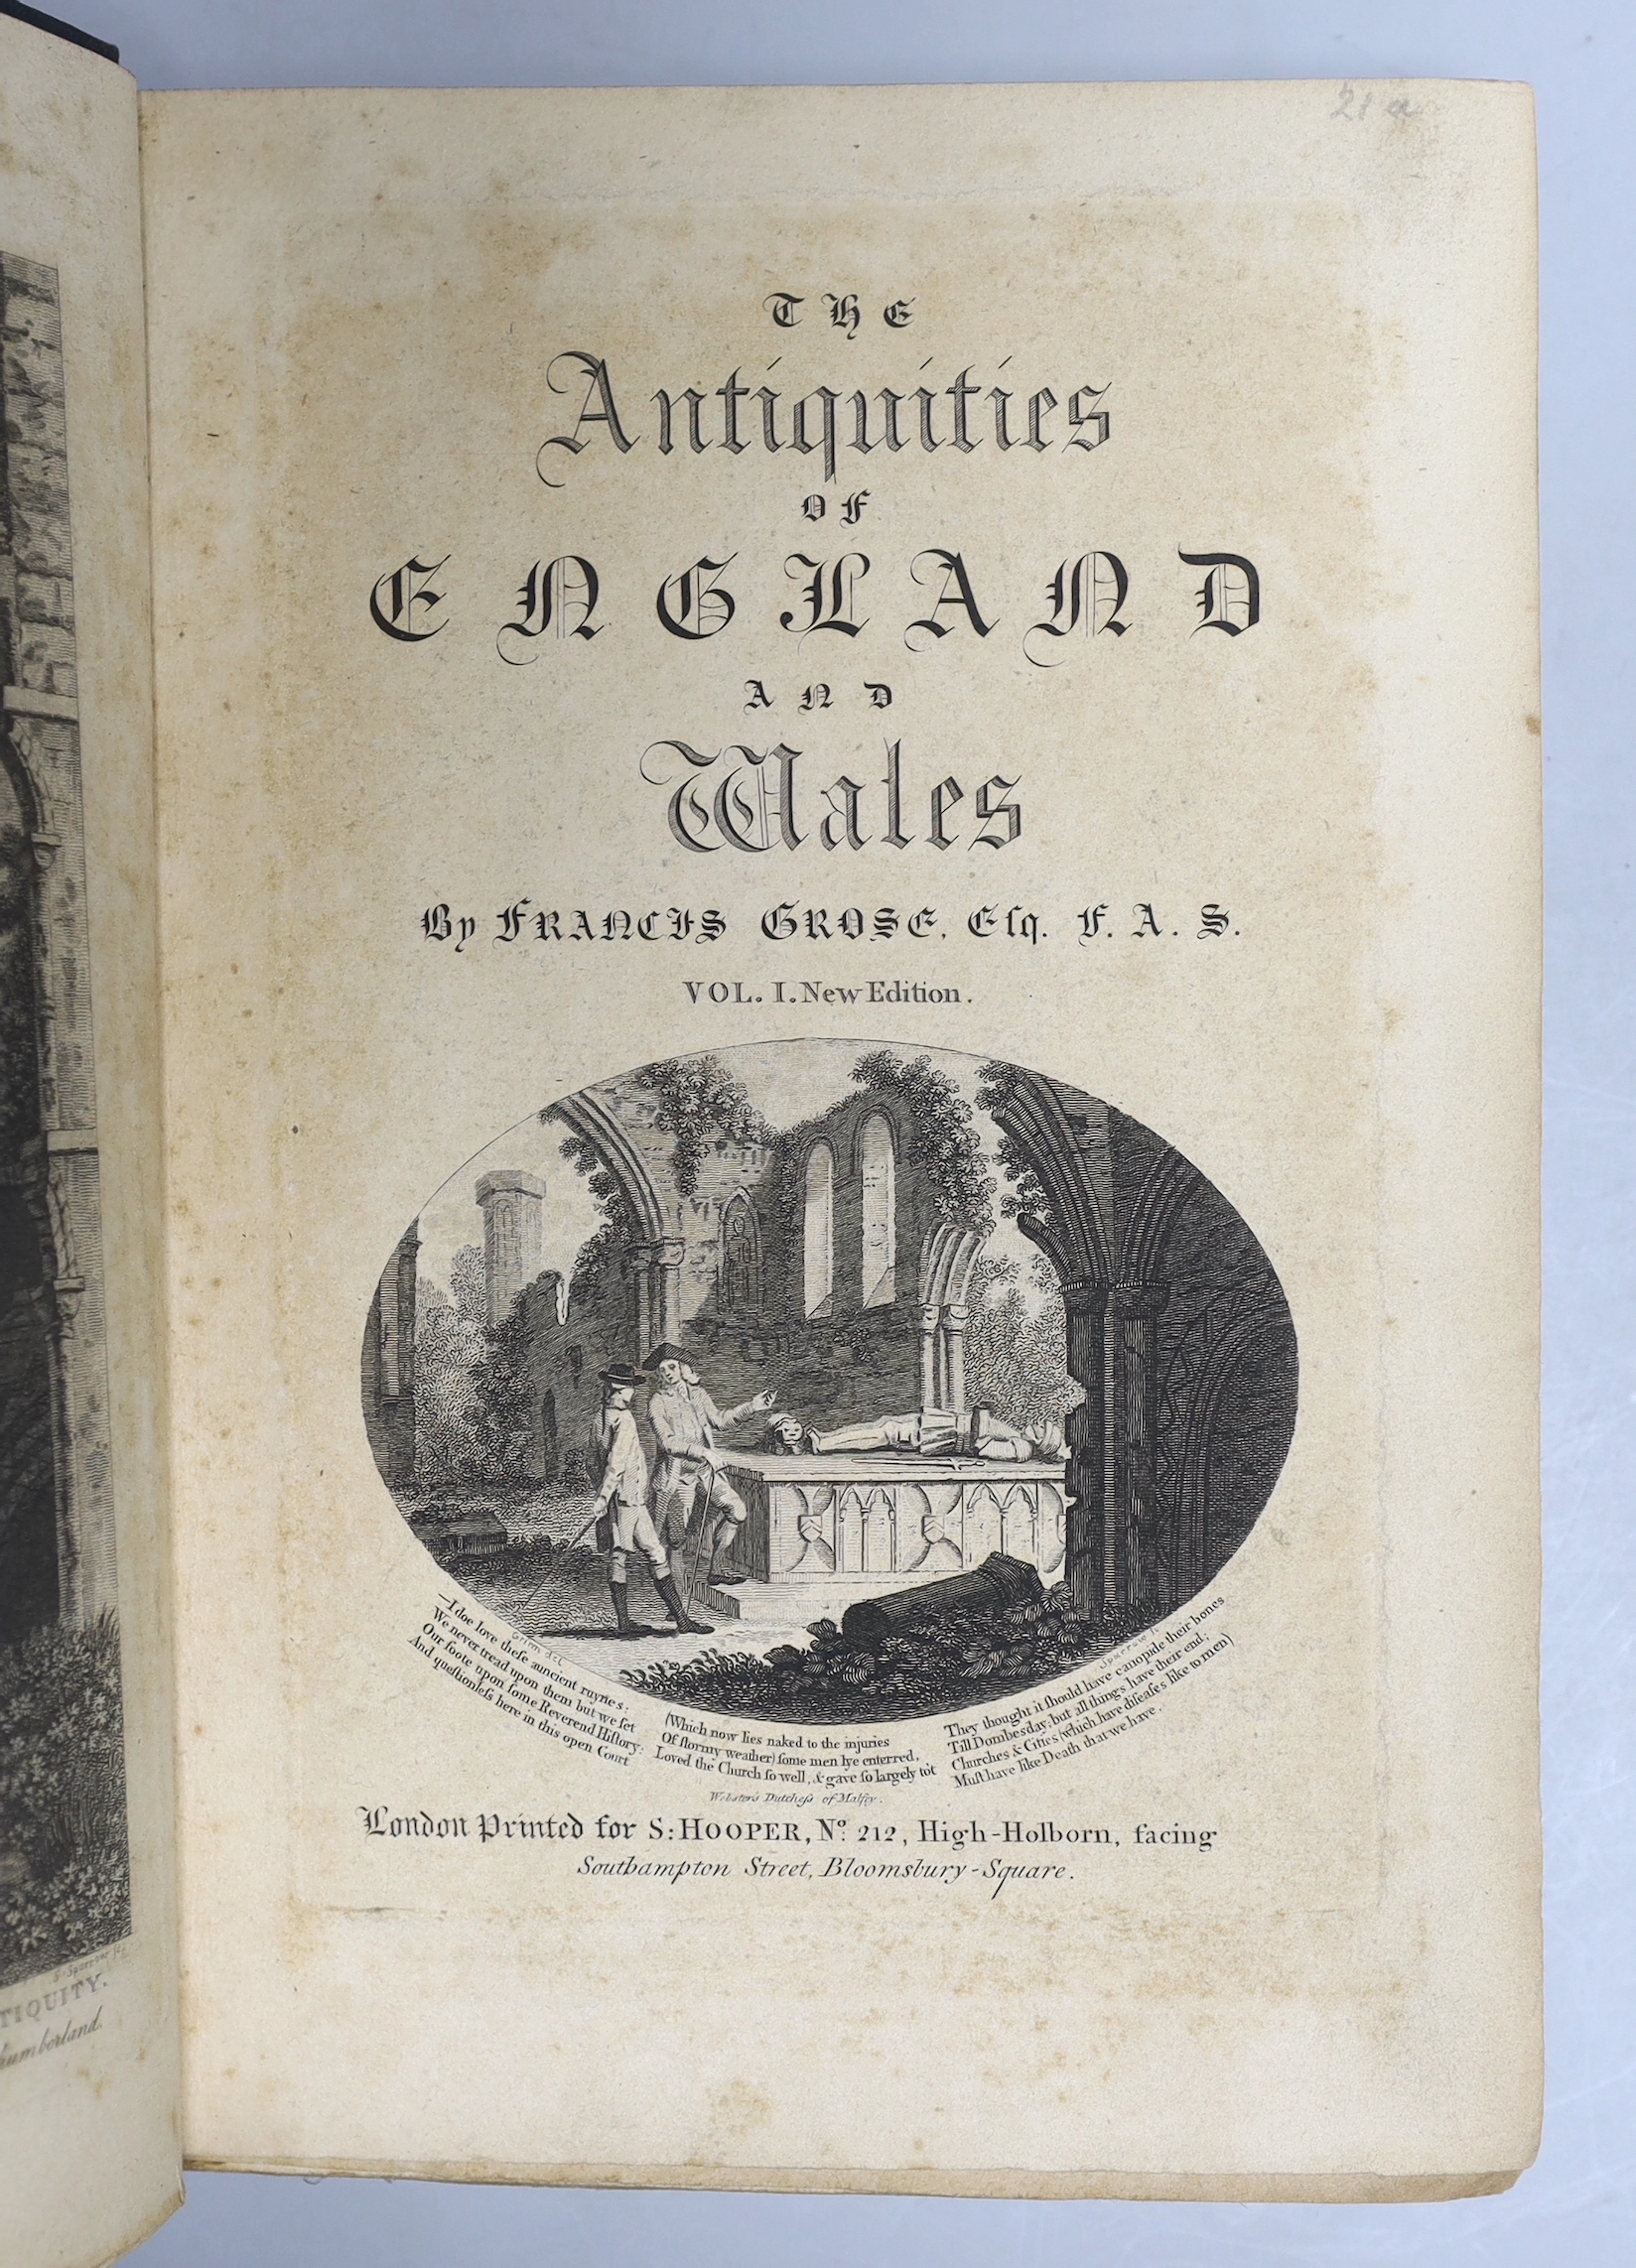 BRITAIN: Grose, Francis. The Antiquities of England and Wales, 8 vols., second edition, numerous engraved plates and plans, some folding, 51 engraved county maps with wash and outline hand-colouring, additional engraved